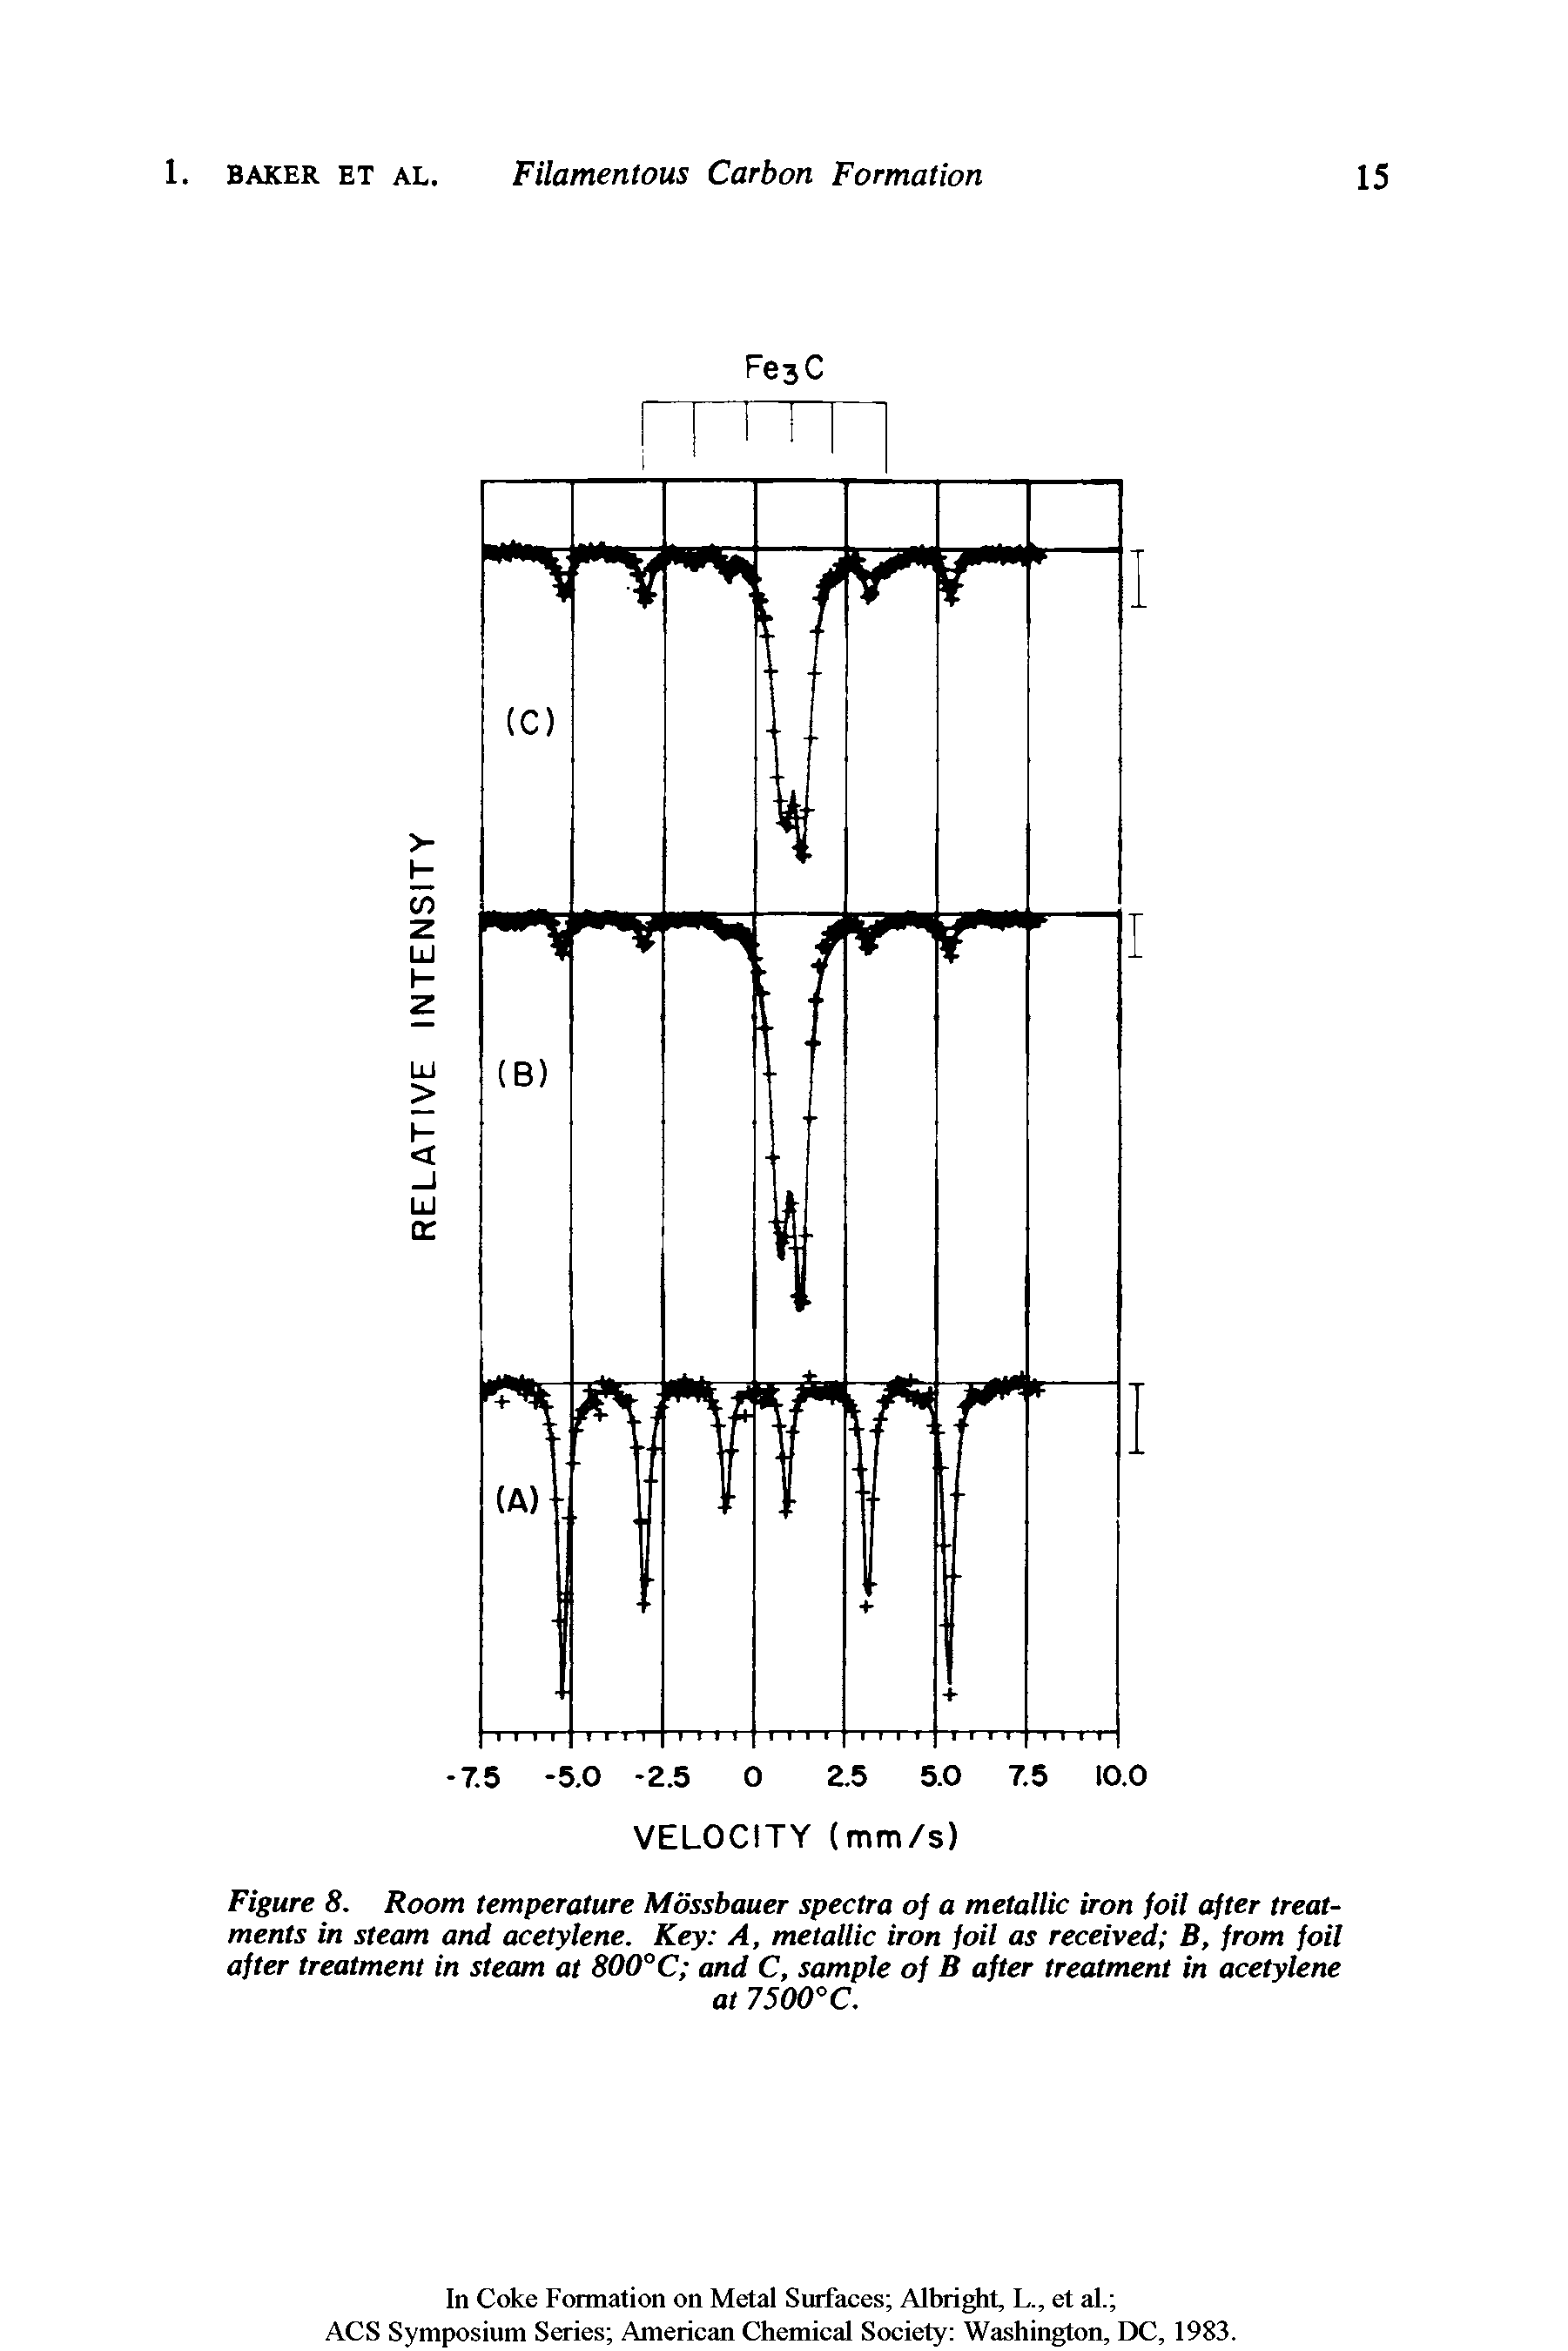 Figure 8. Room temperature Mossbauer spectra of a metallic iron foil after treatments in steam and acetylene. Key A, metallic iron foil as received B, from foil after treatment in steam at 800° C and C, sample of B after treatment in acetylene...